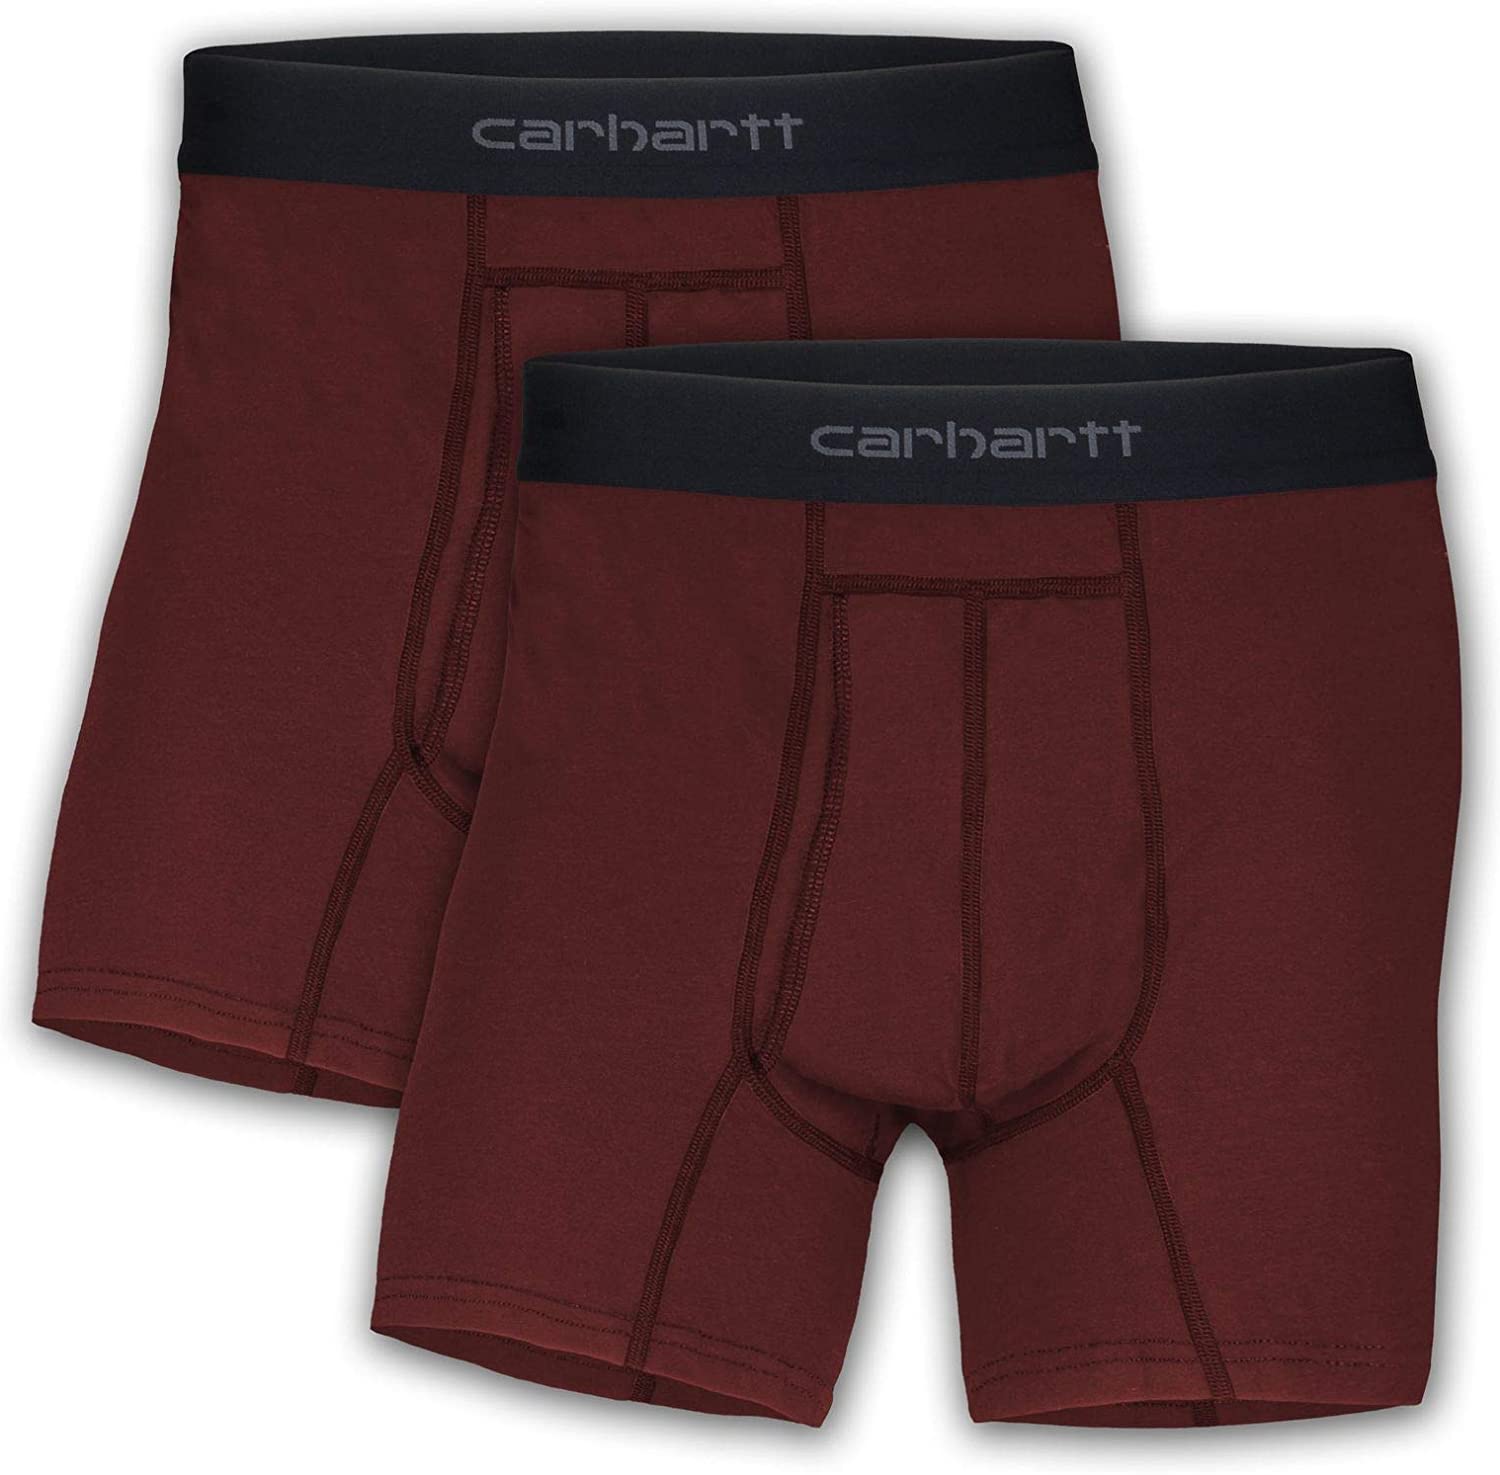 Carhartt mens Cotton Polyester 2 Pack Boxer Briefs, Black, Small US at   Men's Clothing store